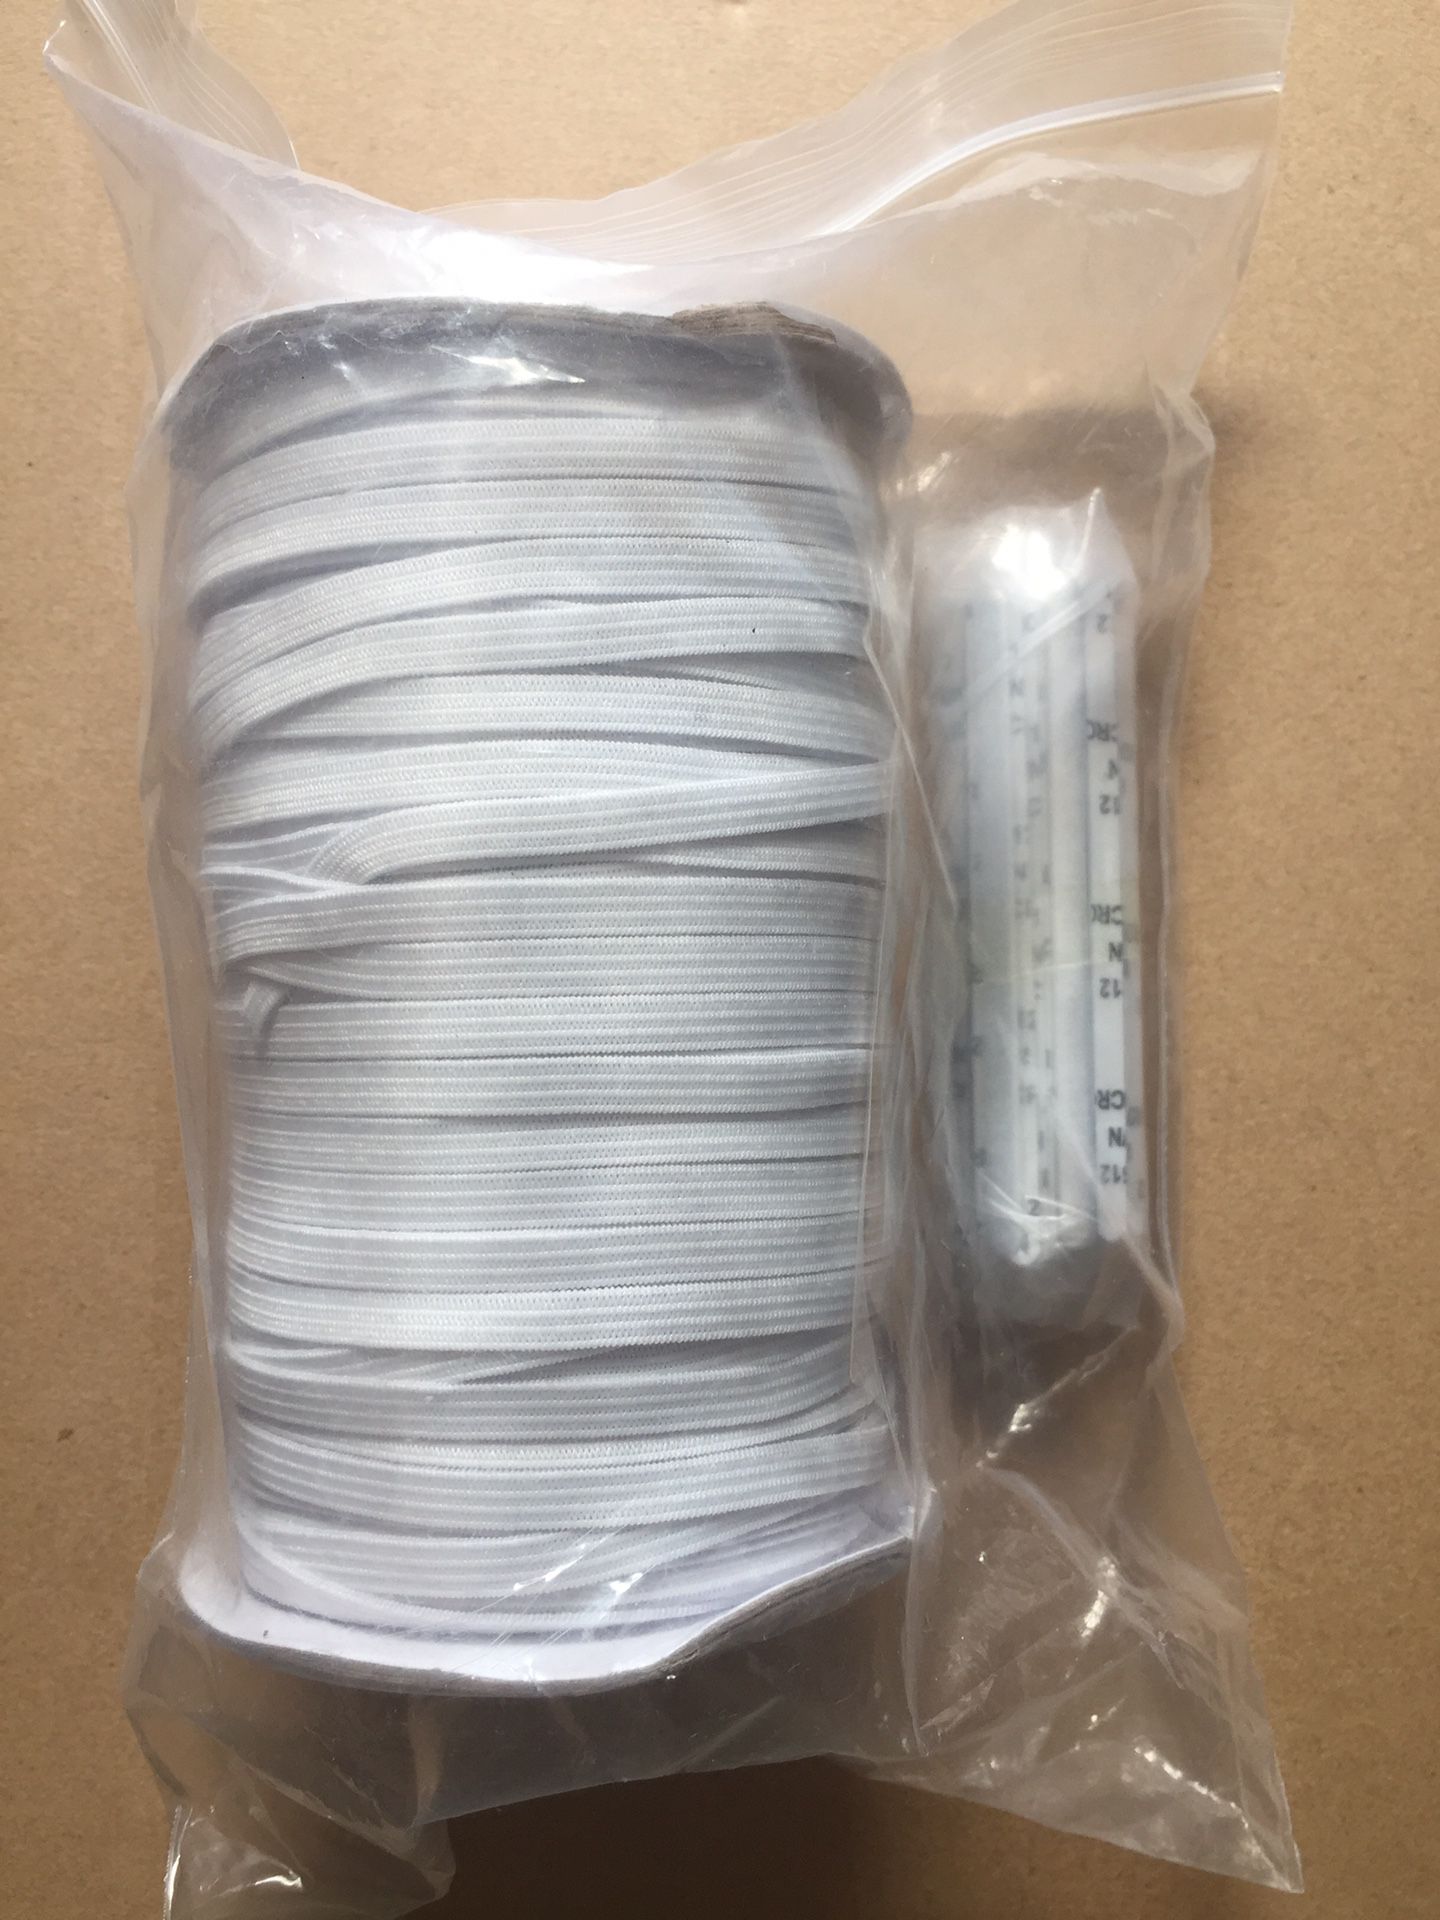 Elastic Cord Band, 100 Yards (91 Meters) 1/4 Inch White - Brand New